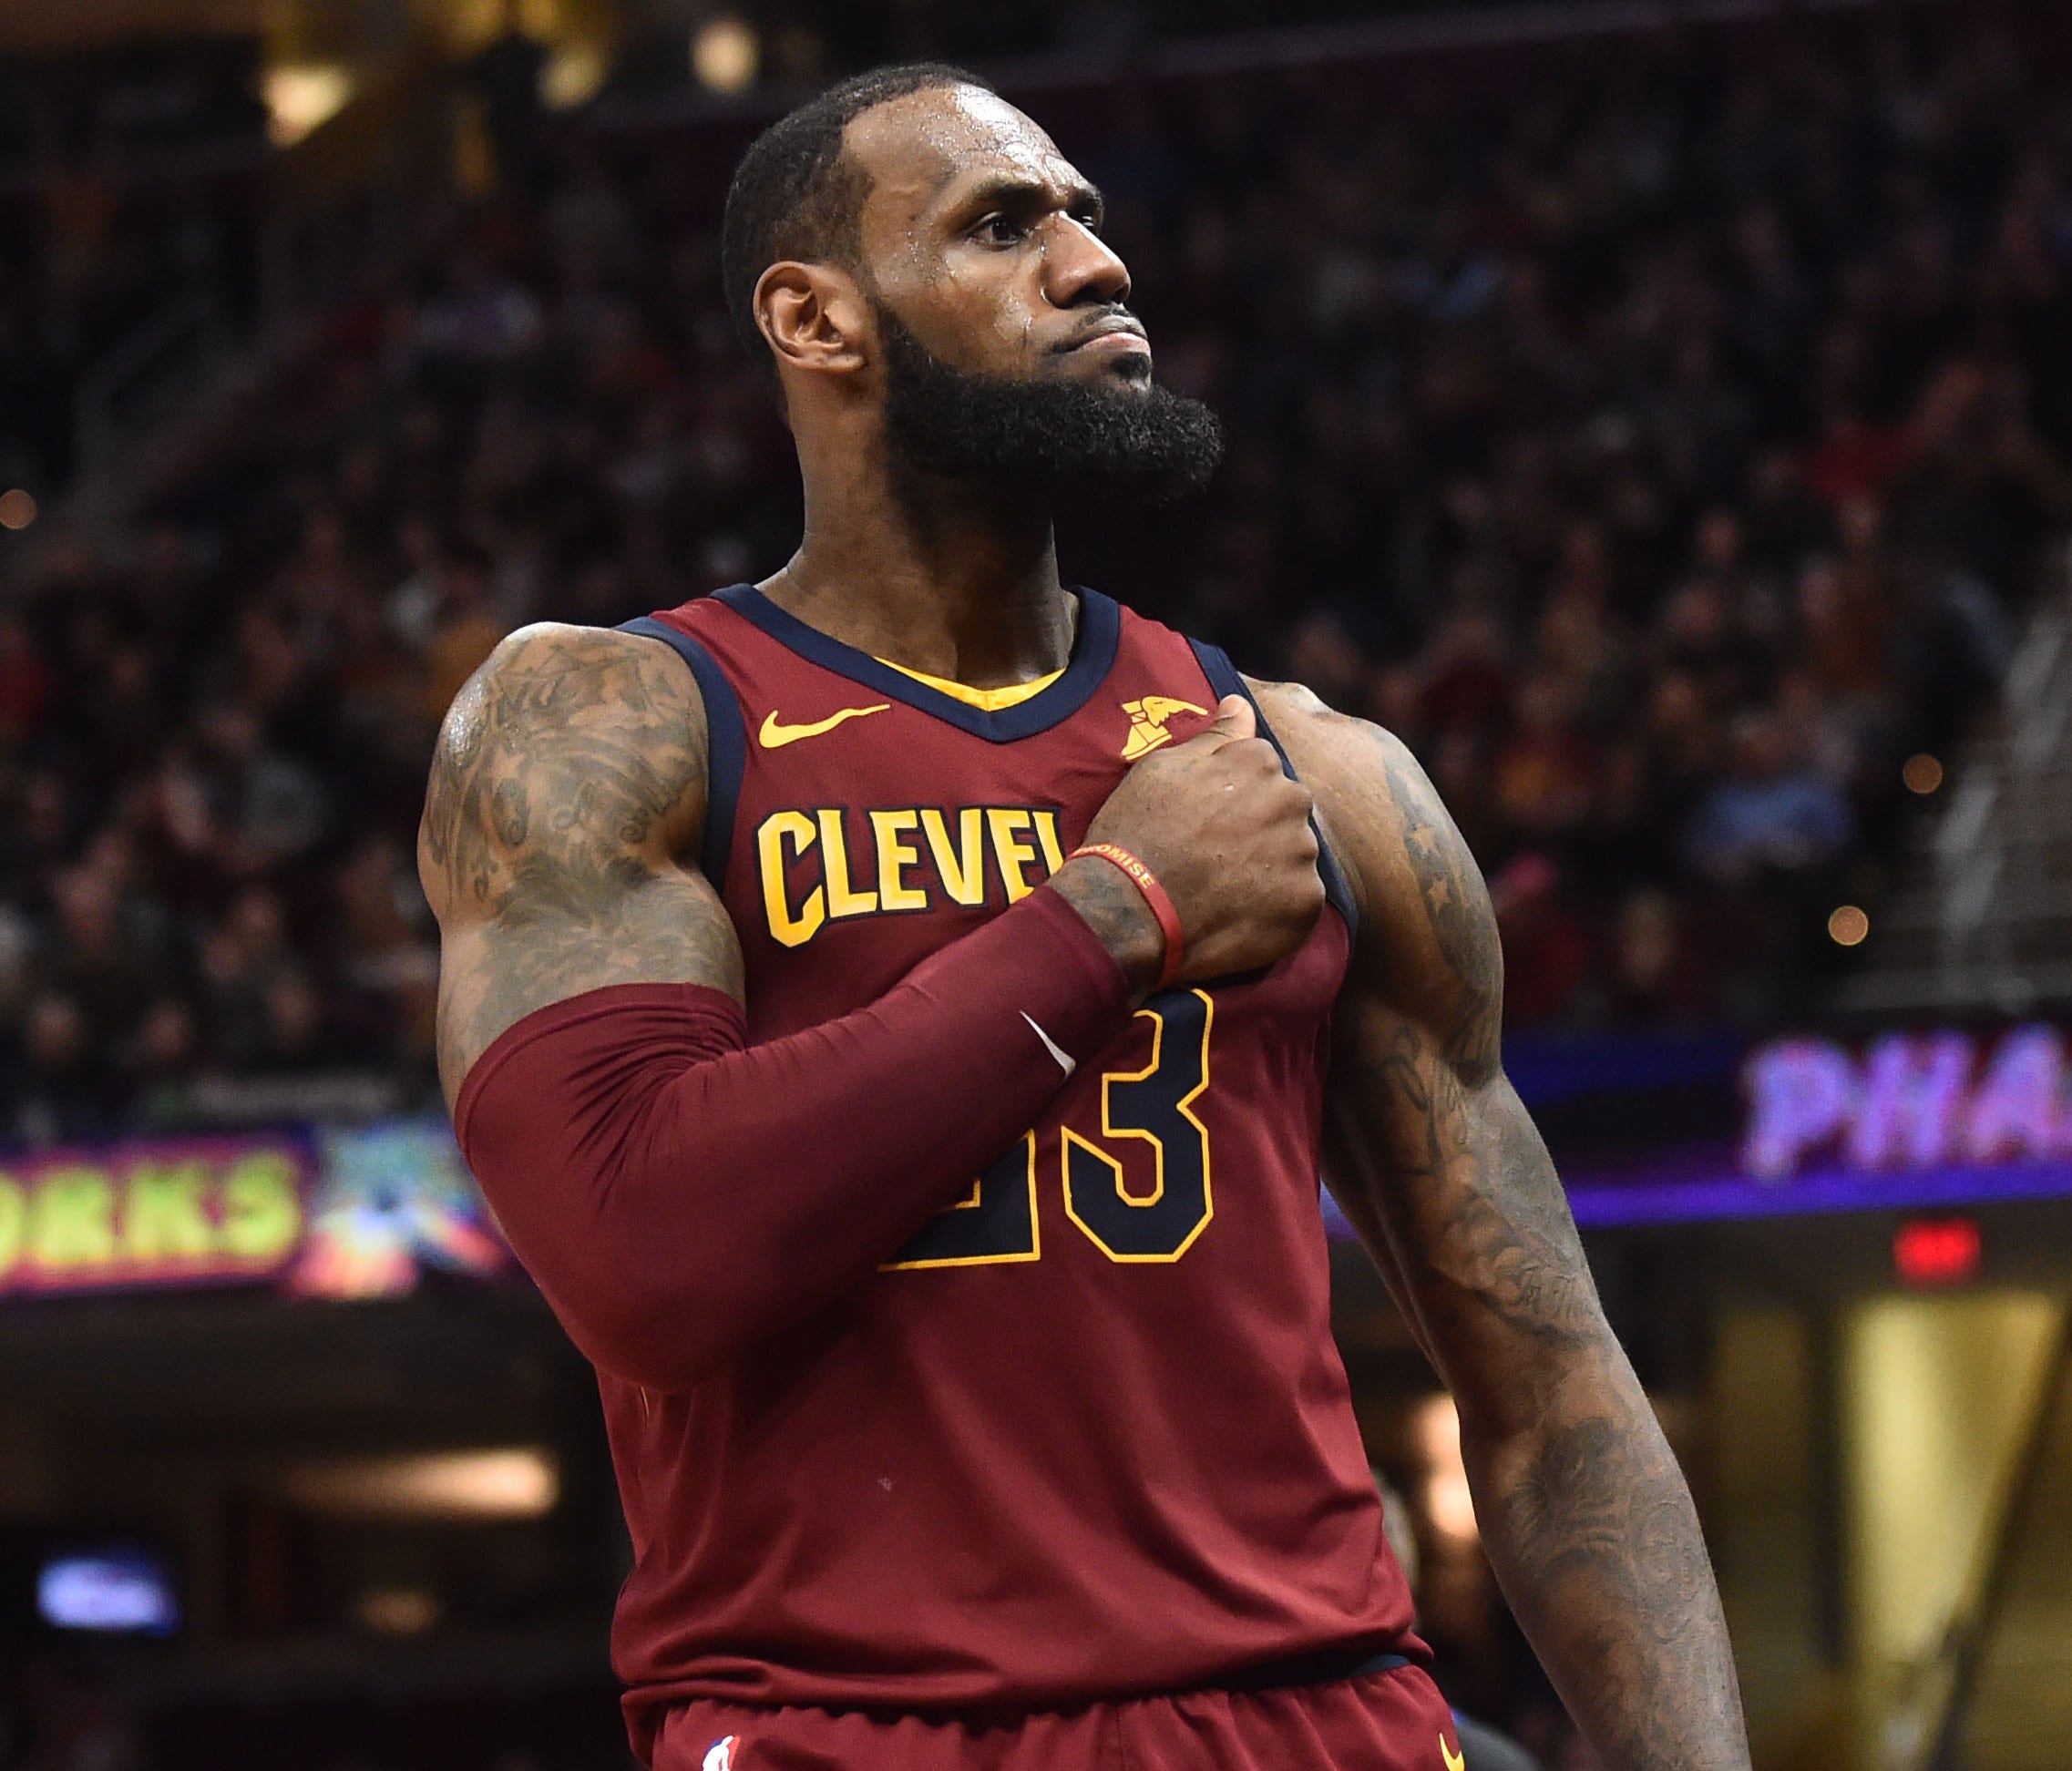 Jan 28, 2018; Cleveland, OH, USA; Cleveland Cavaliers forward LeBron James (23) reacts after a basket during the second half against the Detroit Pistons at Quicken Loans Arena. Mandatory Credit: Ken Blaze-USA TODAY Sports